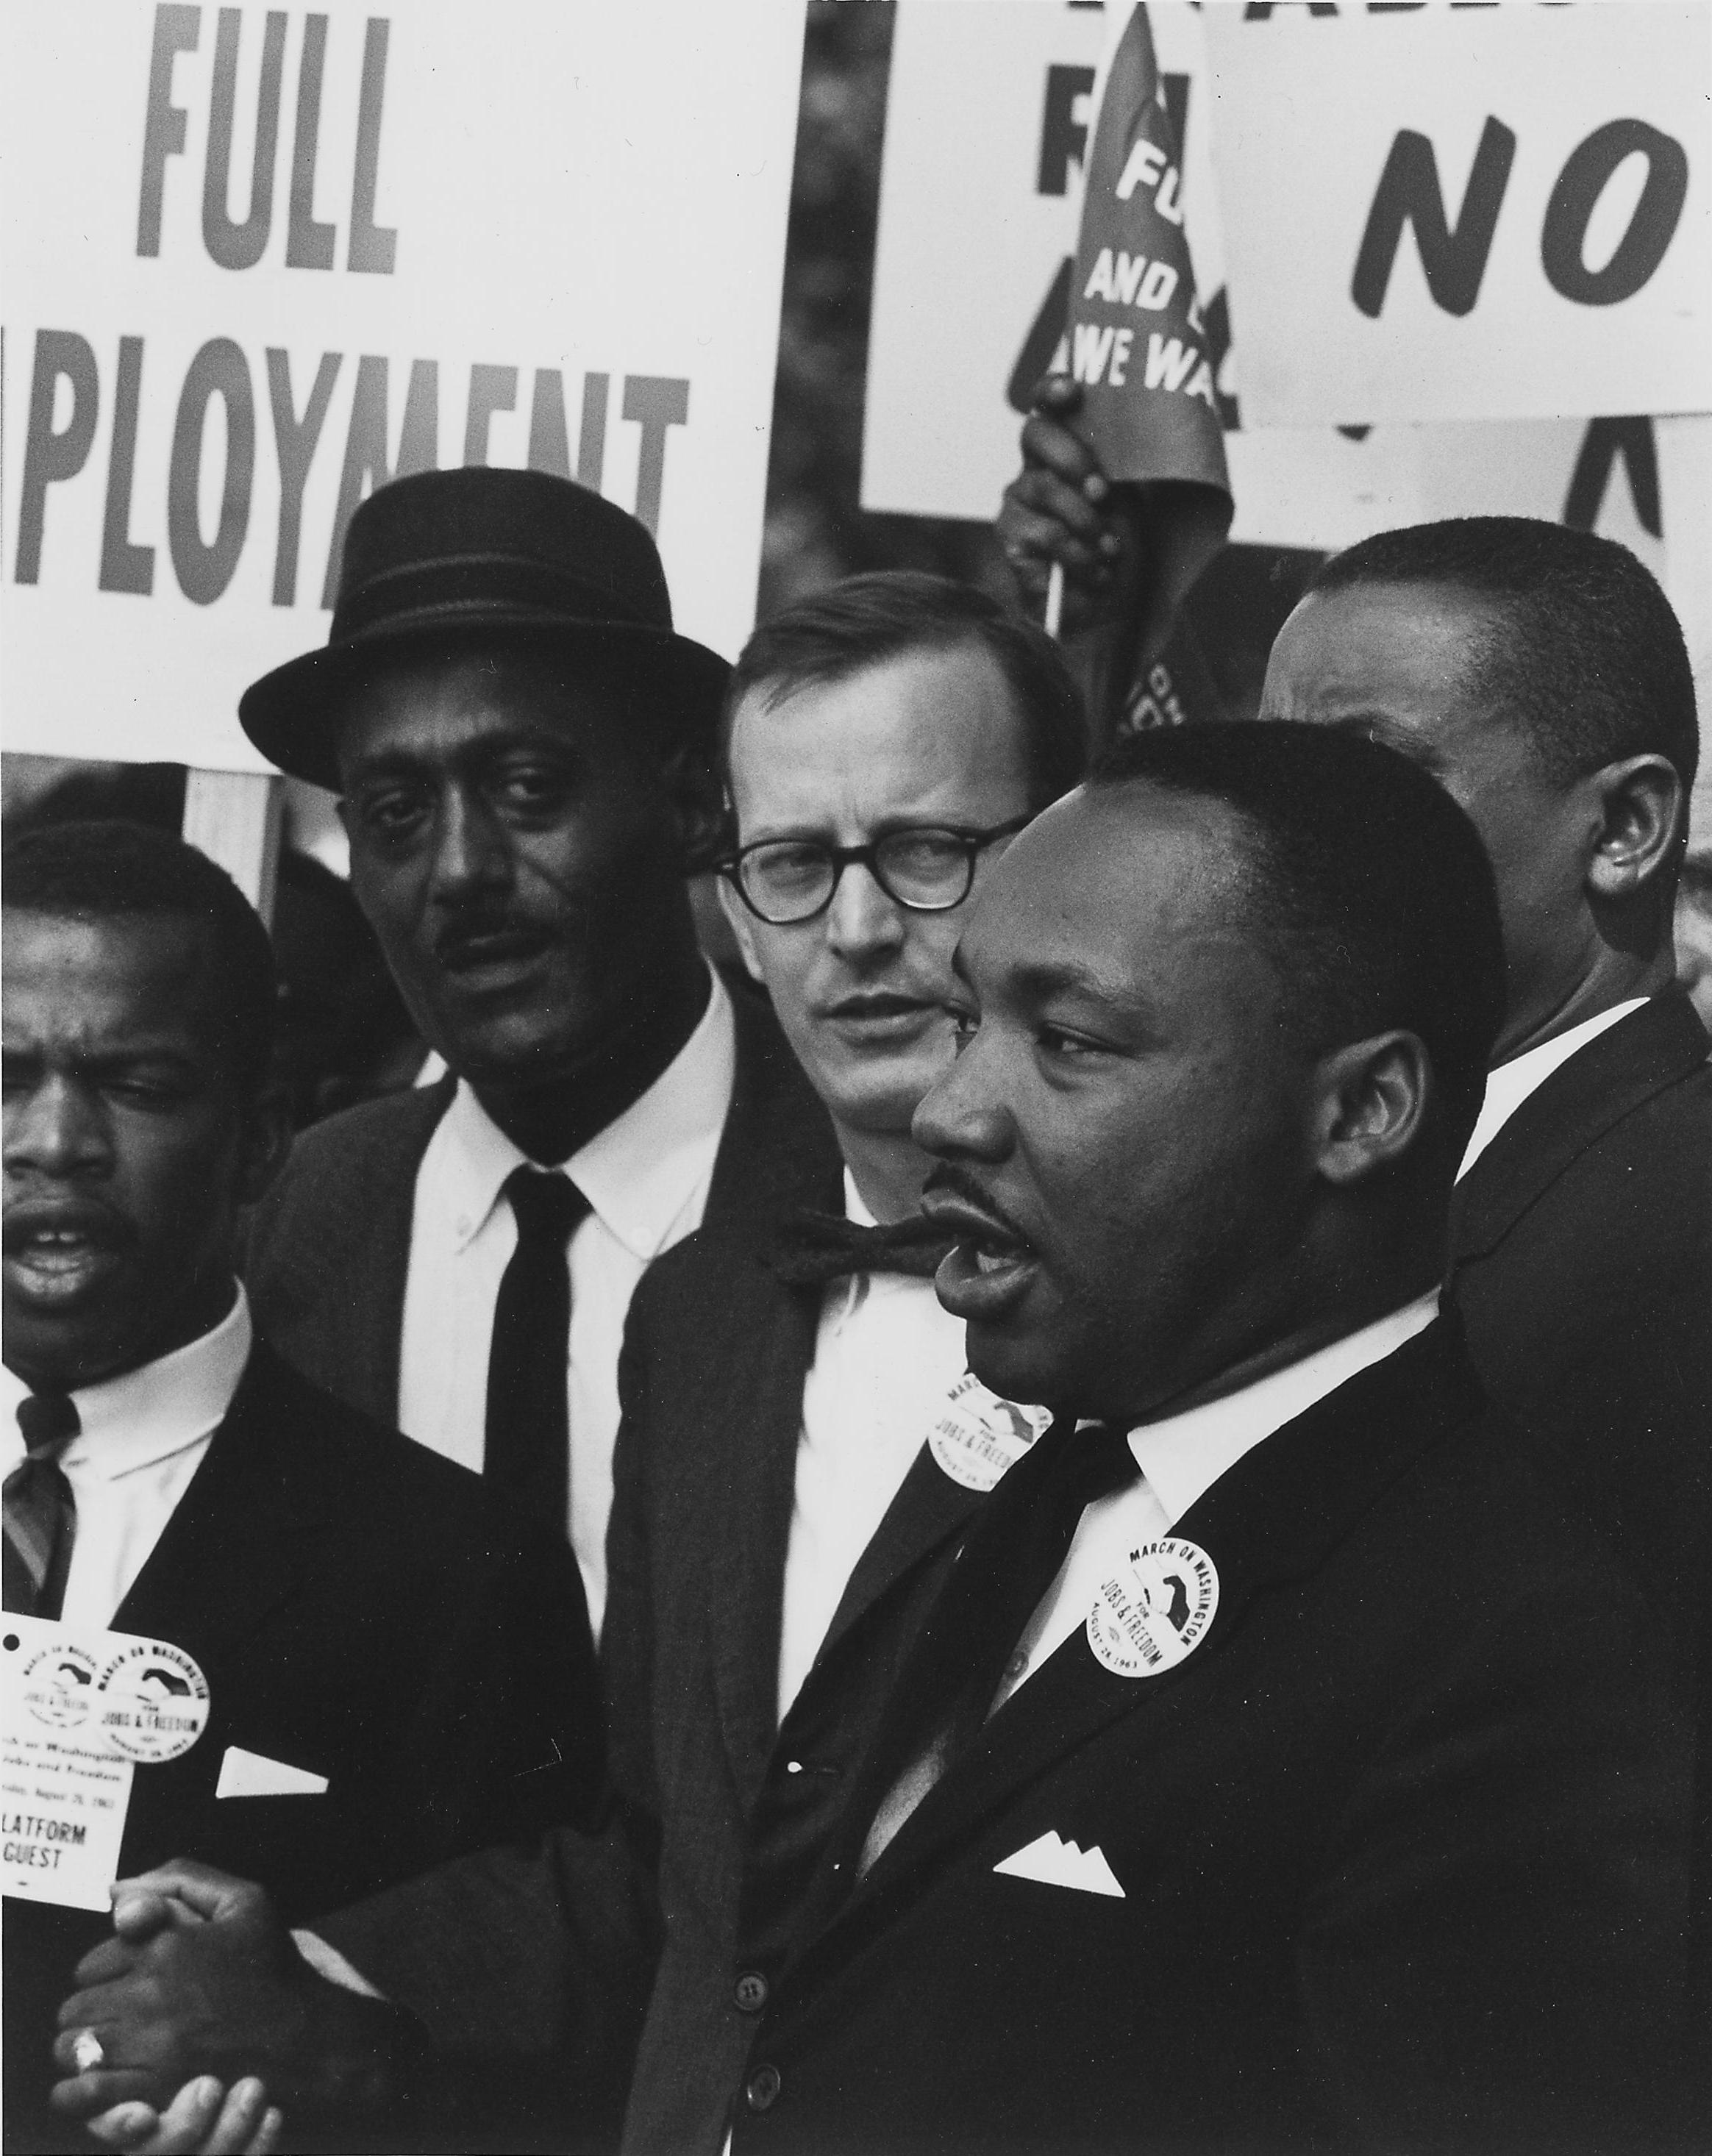 Dr. Martin Luther King Jr. at a civil rights march on Washington D.C. in 1963